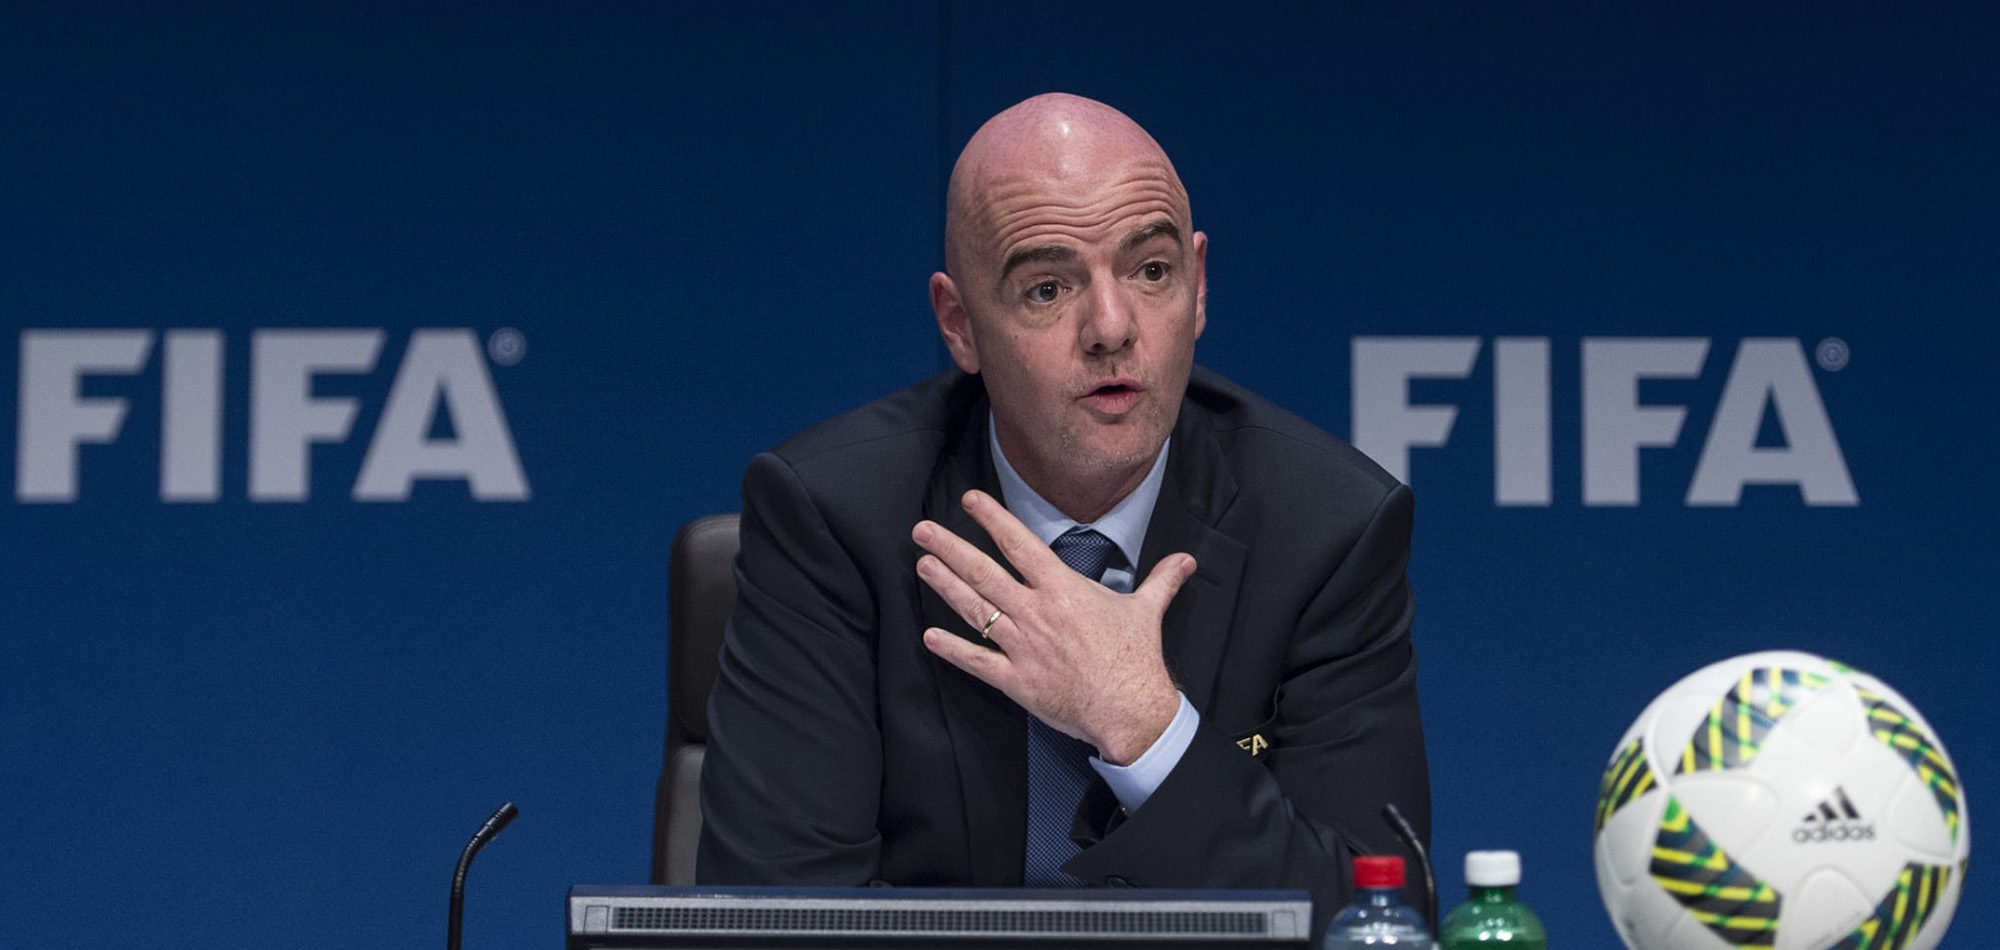 Qatar 2022 to be the best World Cup ever: FIFA President